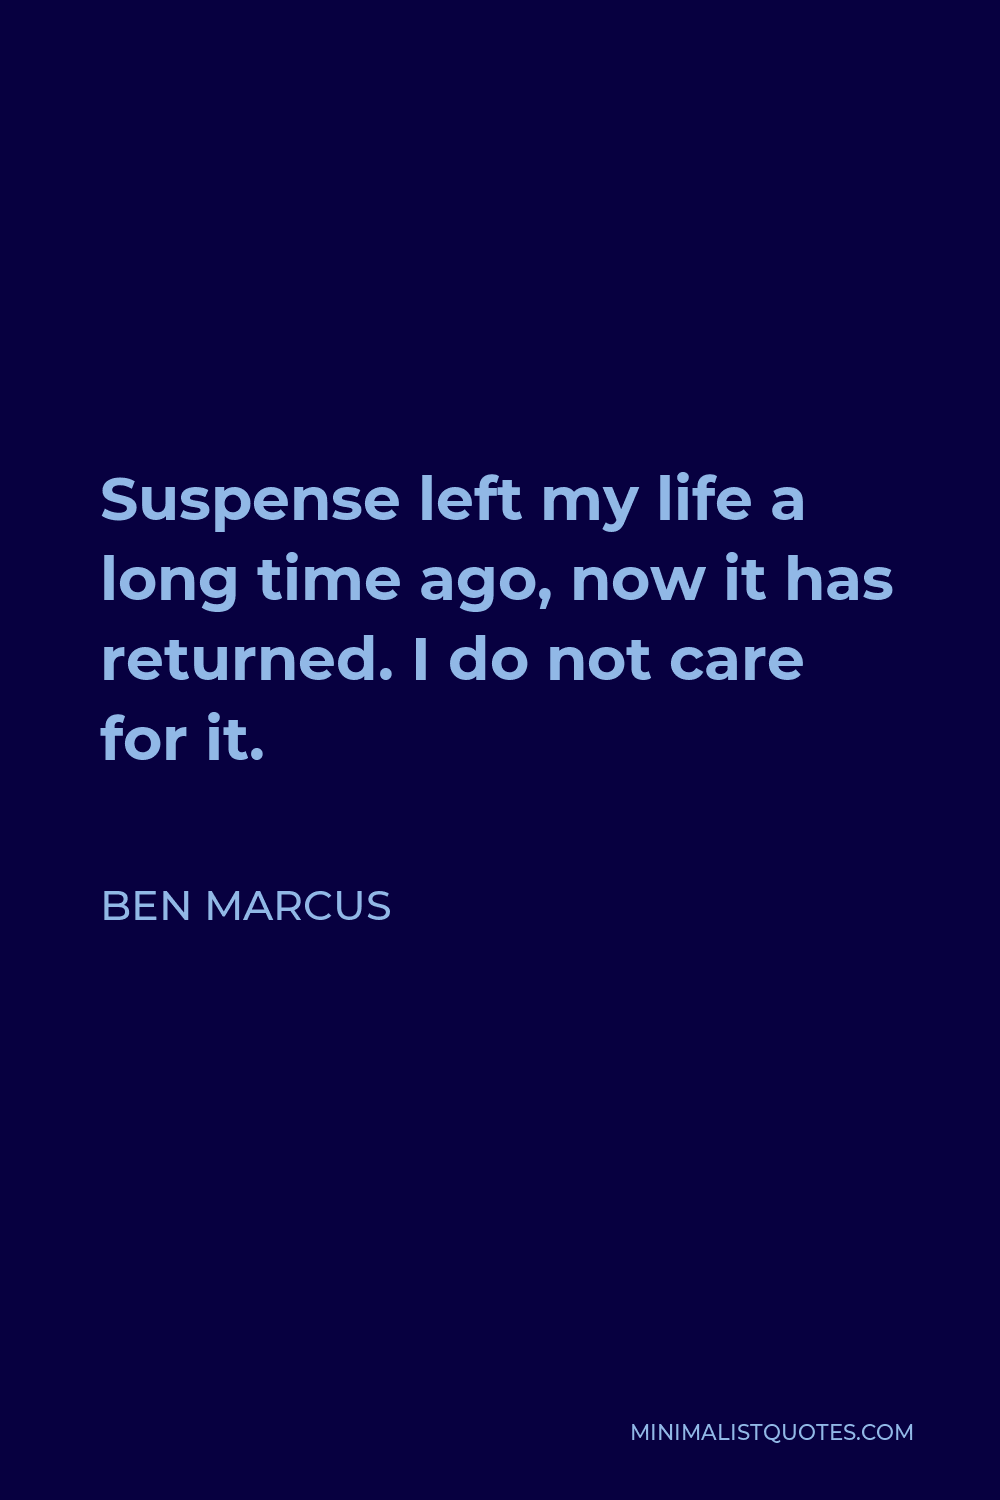 Ben Marcus Quote - Suspense left my life a long time ago, now it has returned. I do not care for it.